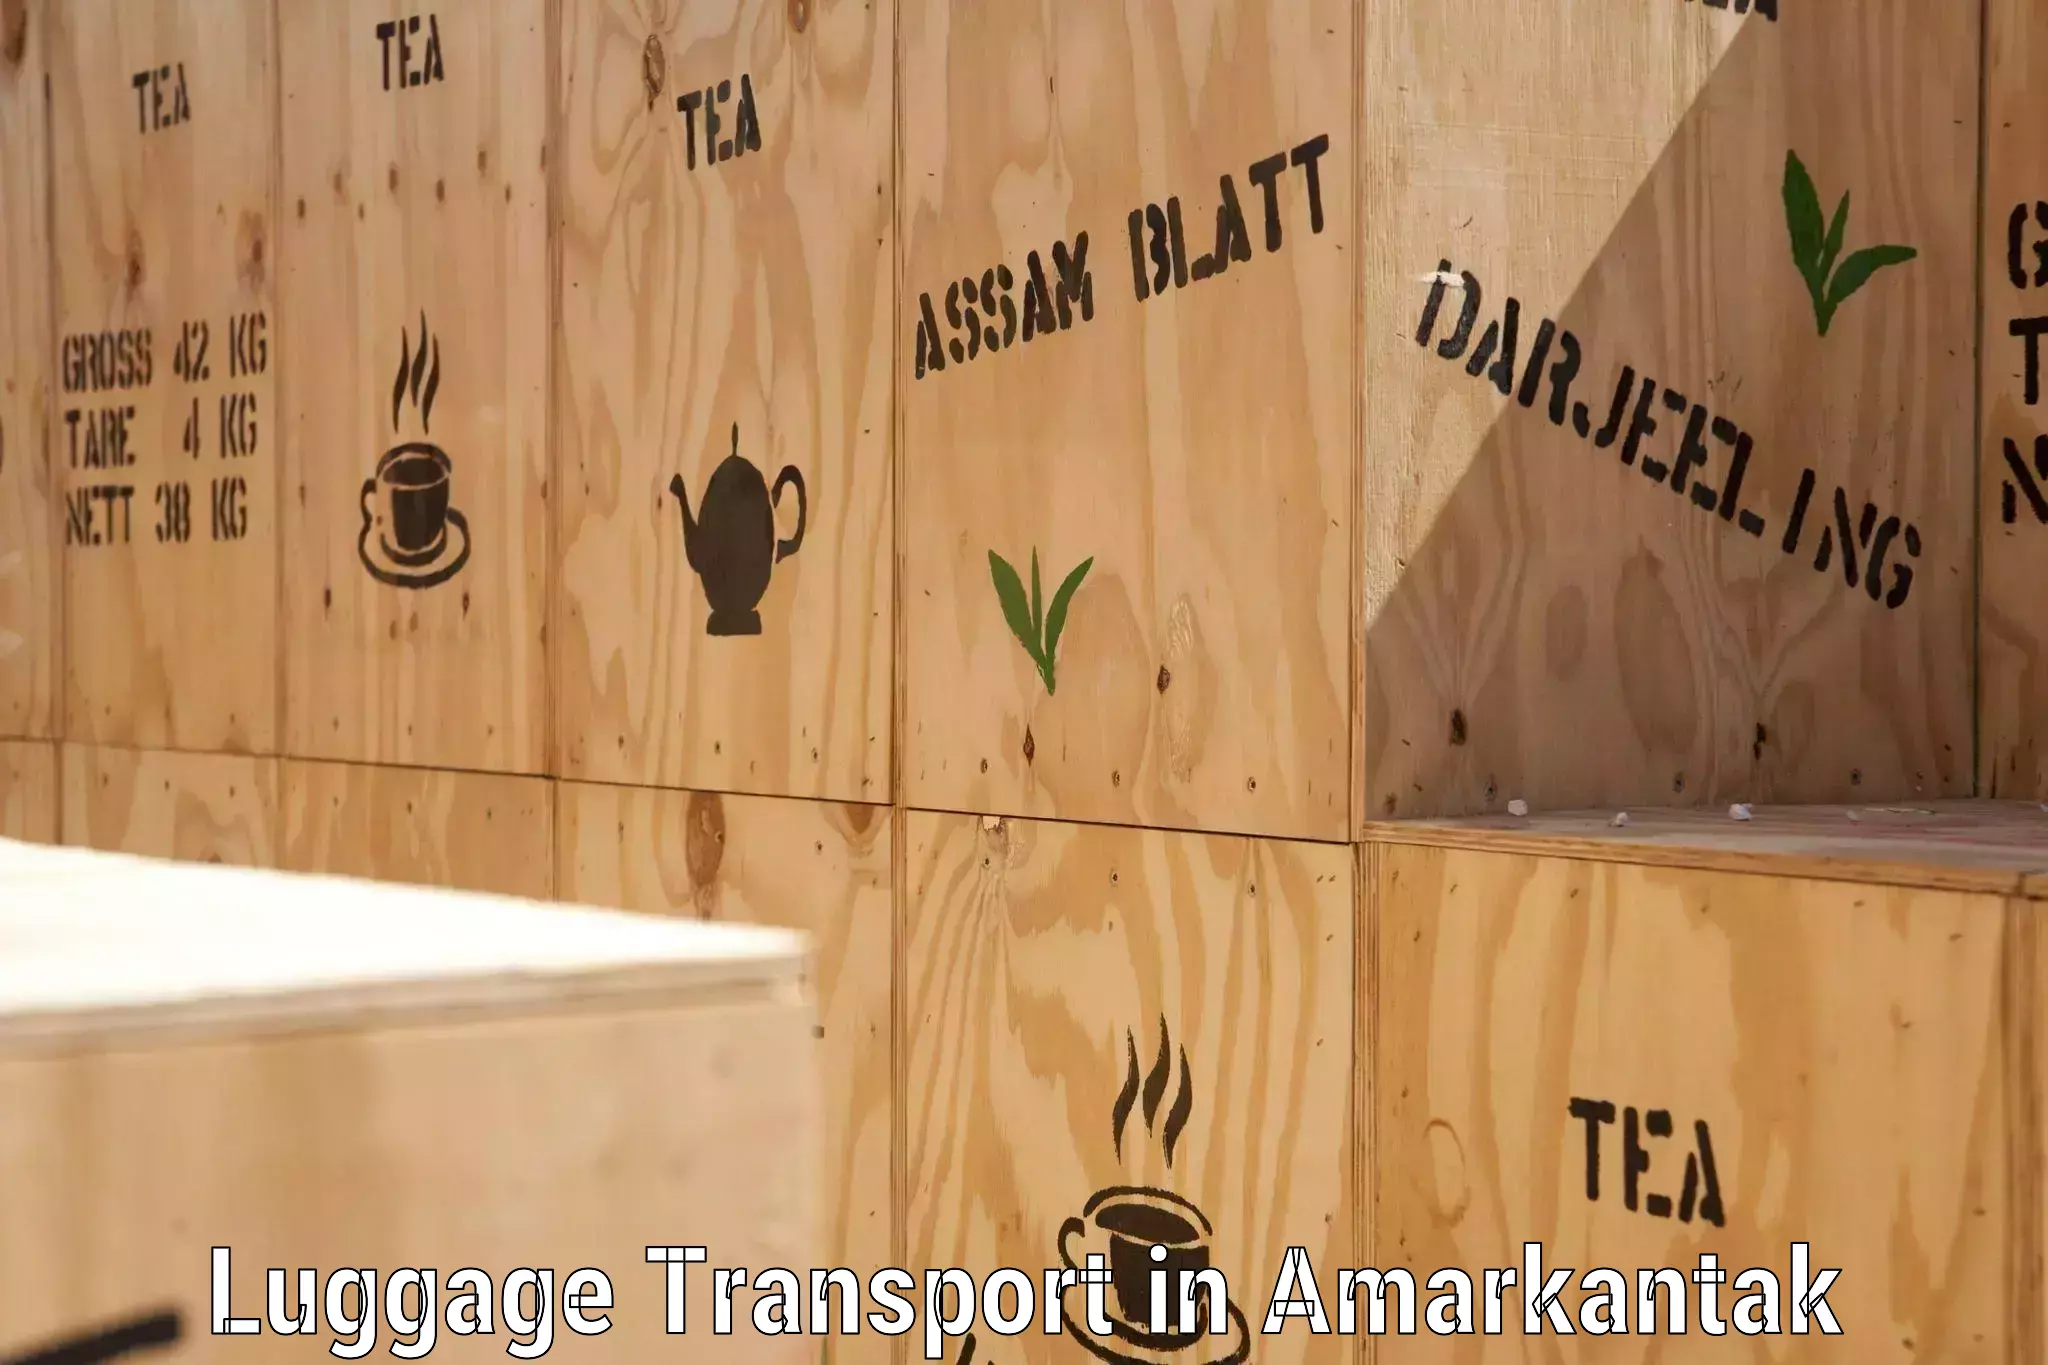 Baggage shipping experience in Amarkantak